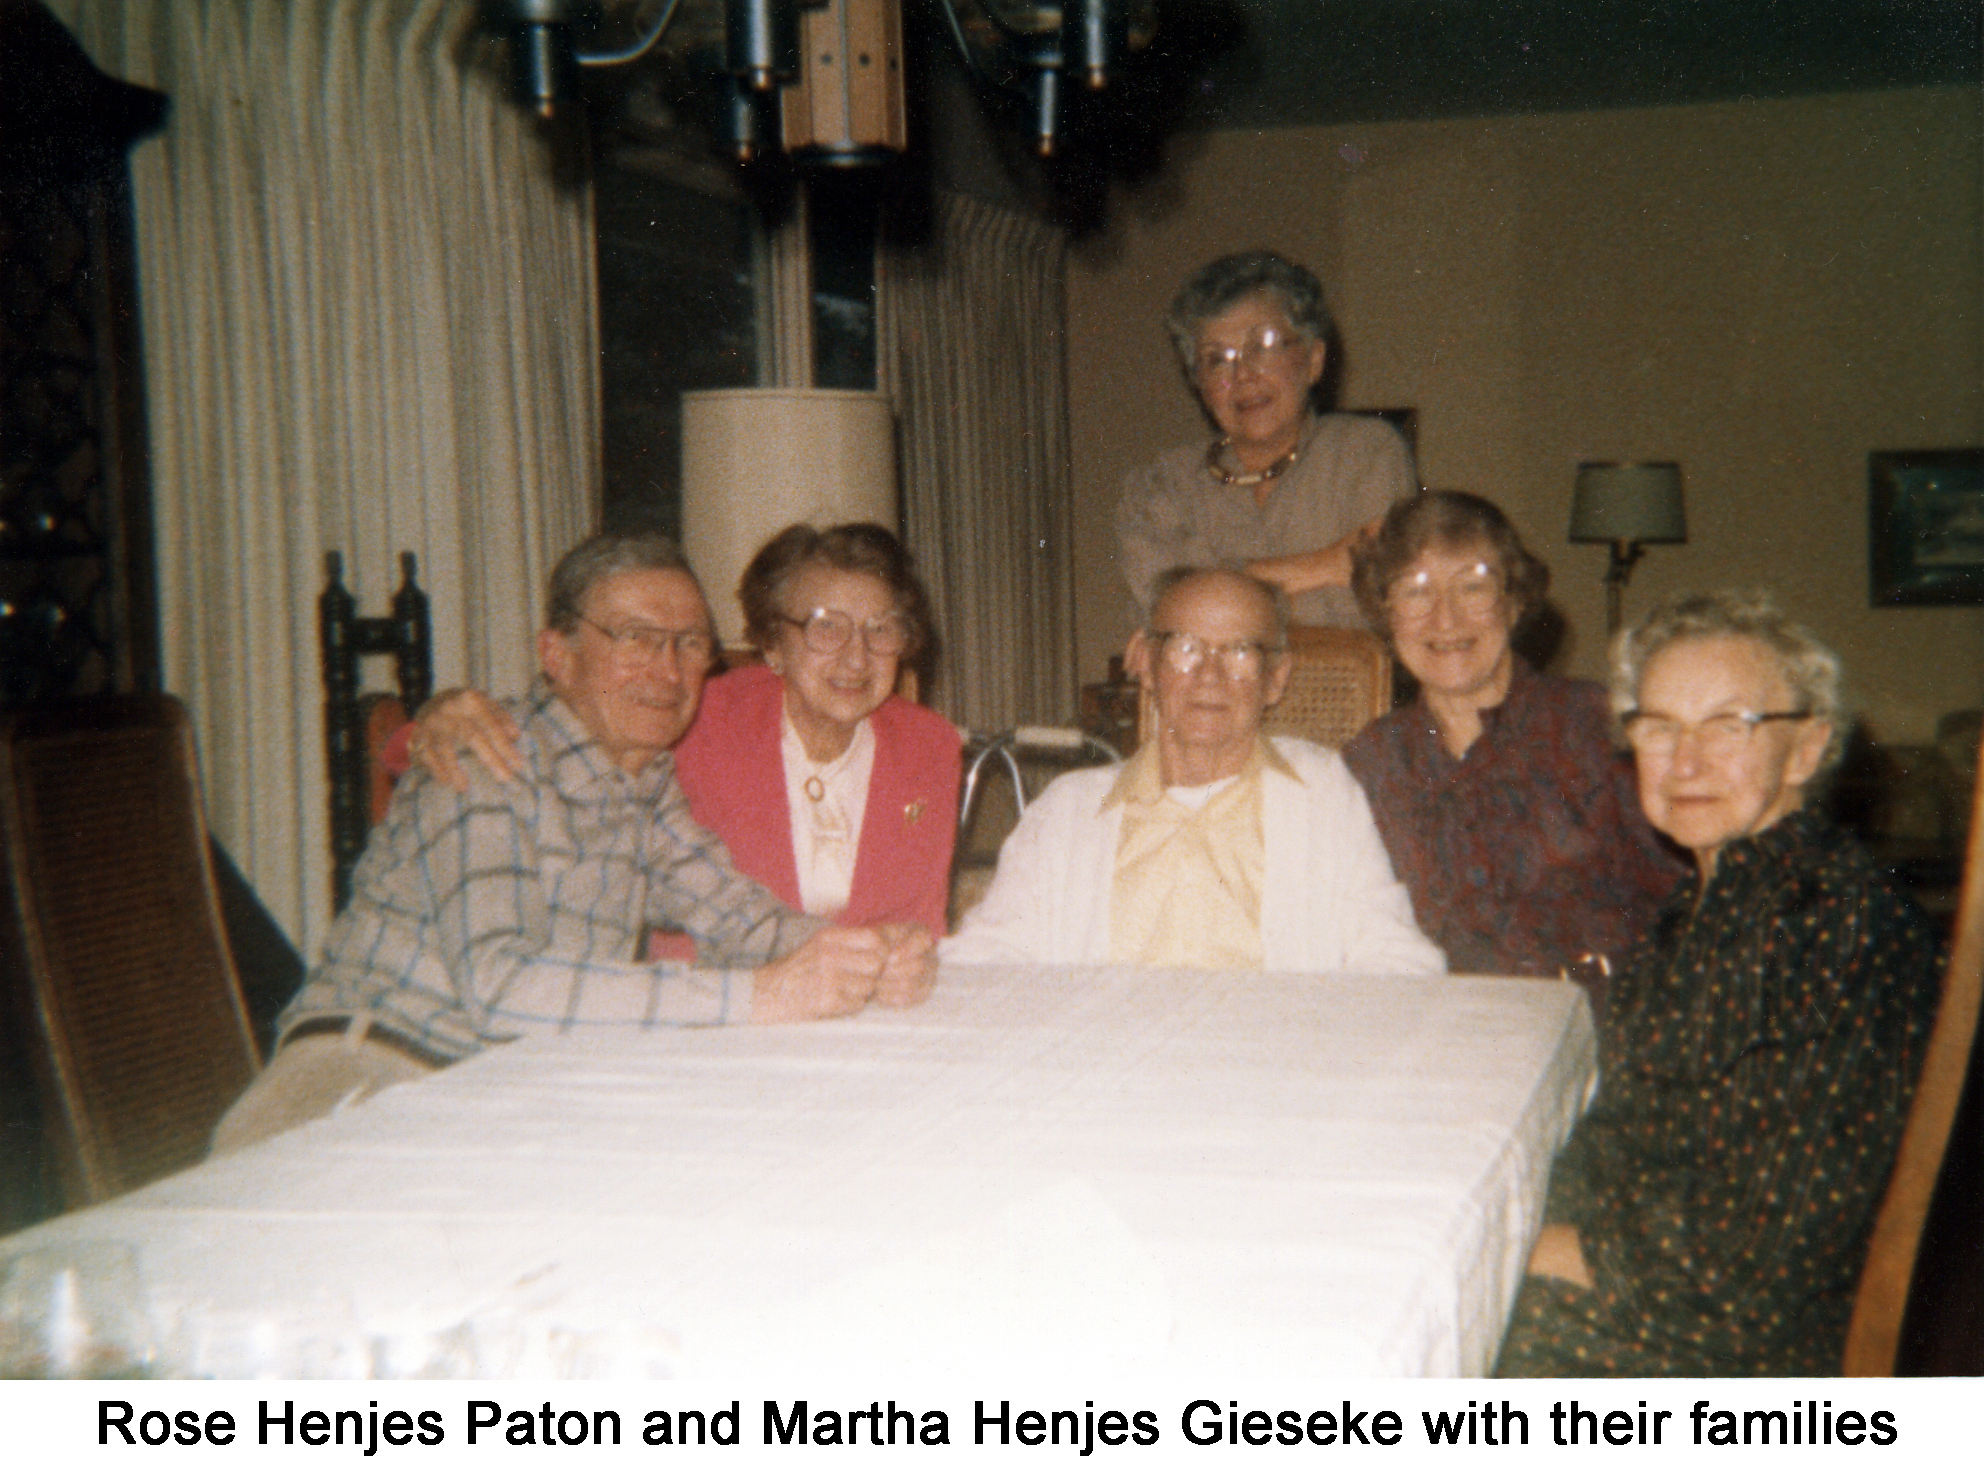 Henjes sisters Martha and Rose with children and spouses